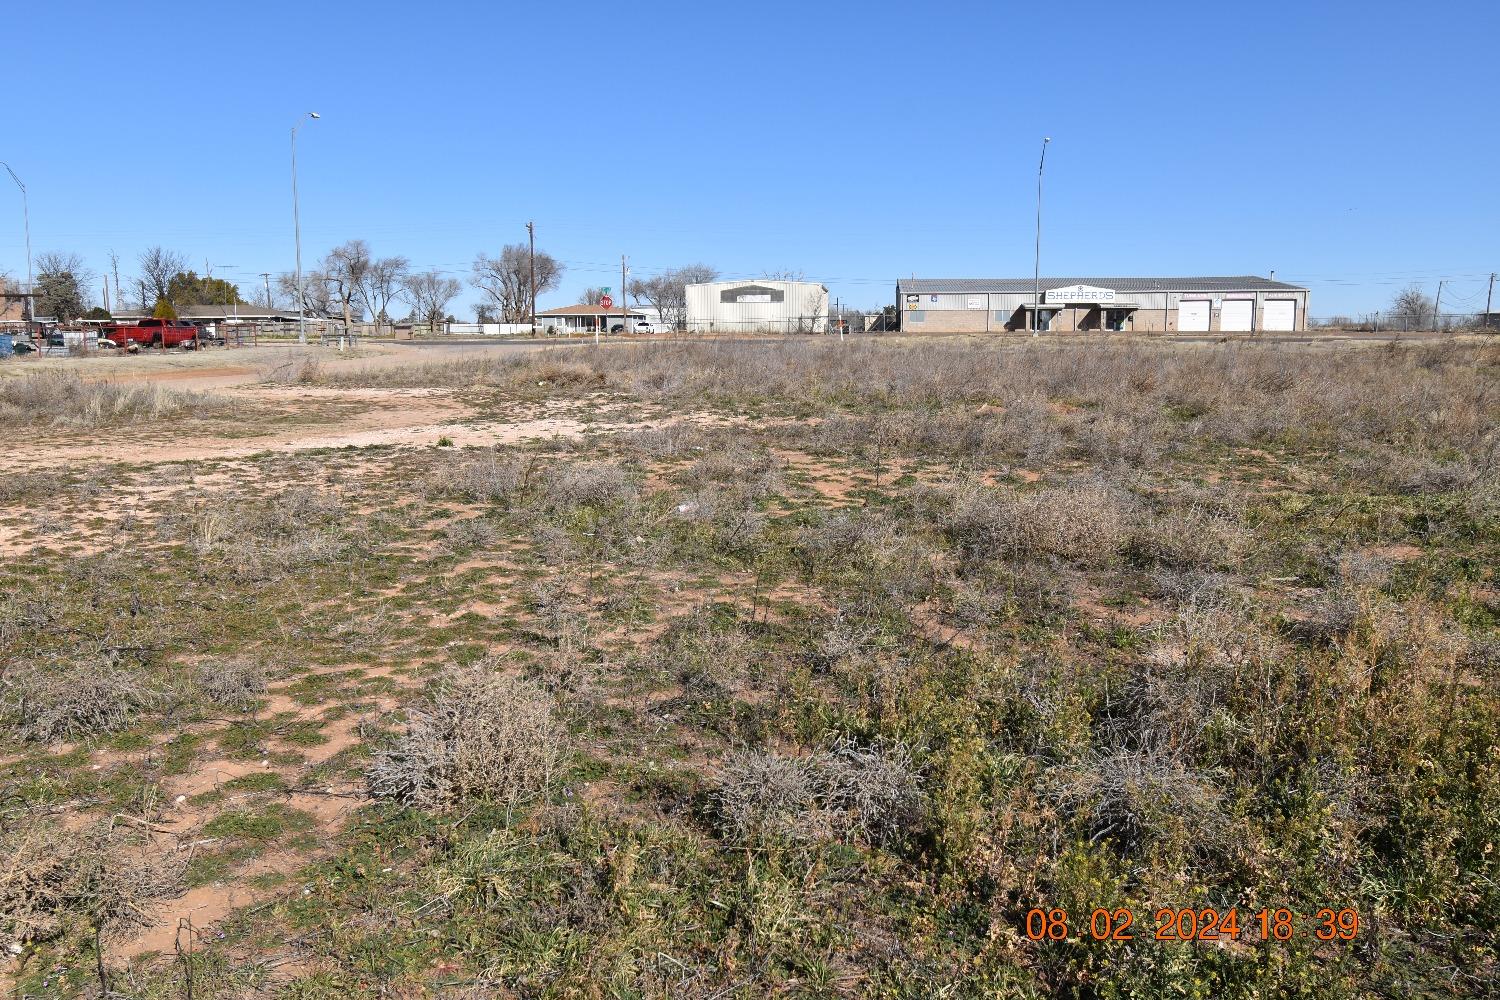 Bargain priced, 1.46 acre corner lot, cleared and ready for construction, between two residential areas currently under construction  and existing multi-family and single family residential housing. City water available at the north boundary of the lot. Seller will subdivide.